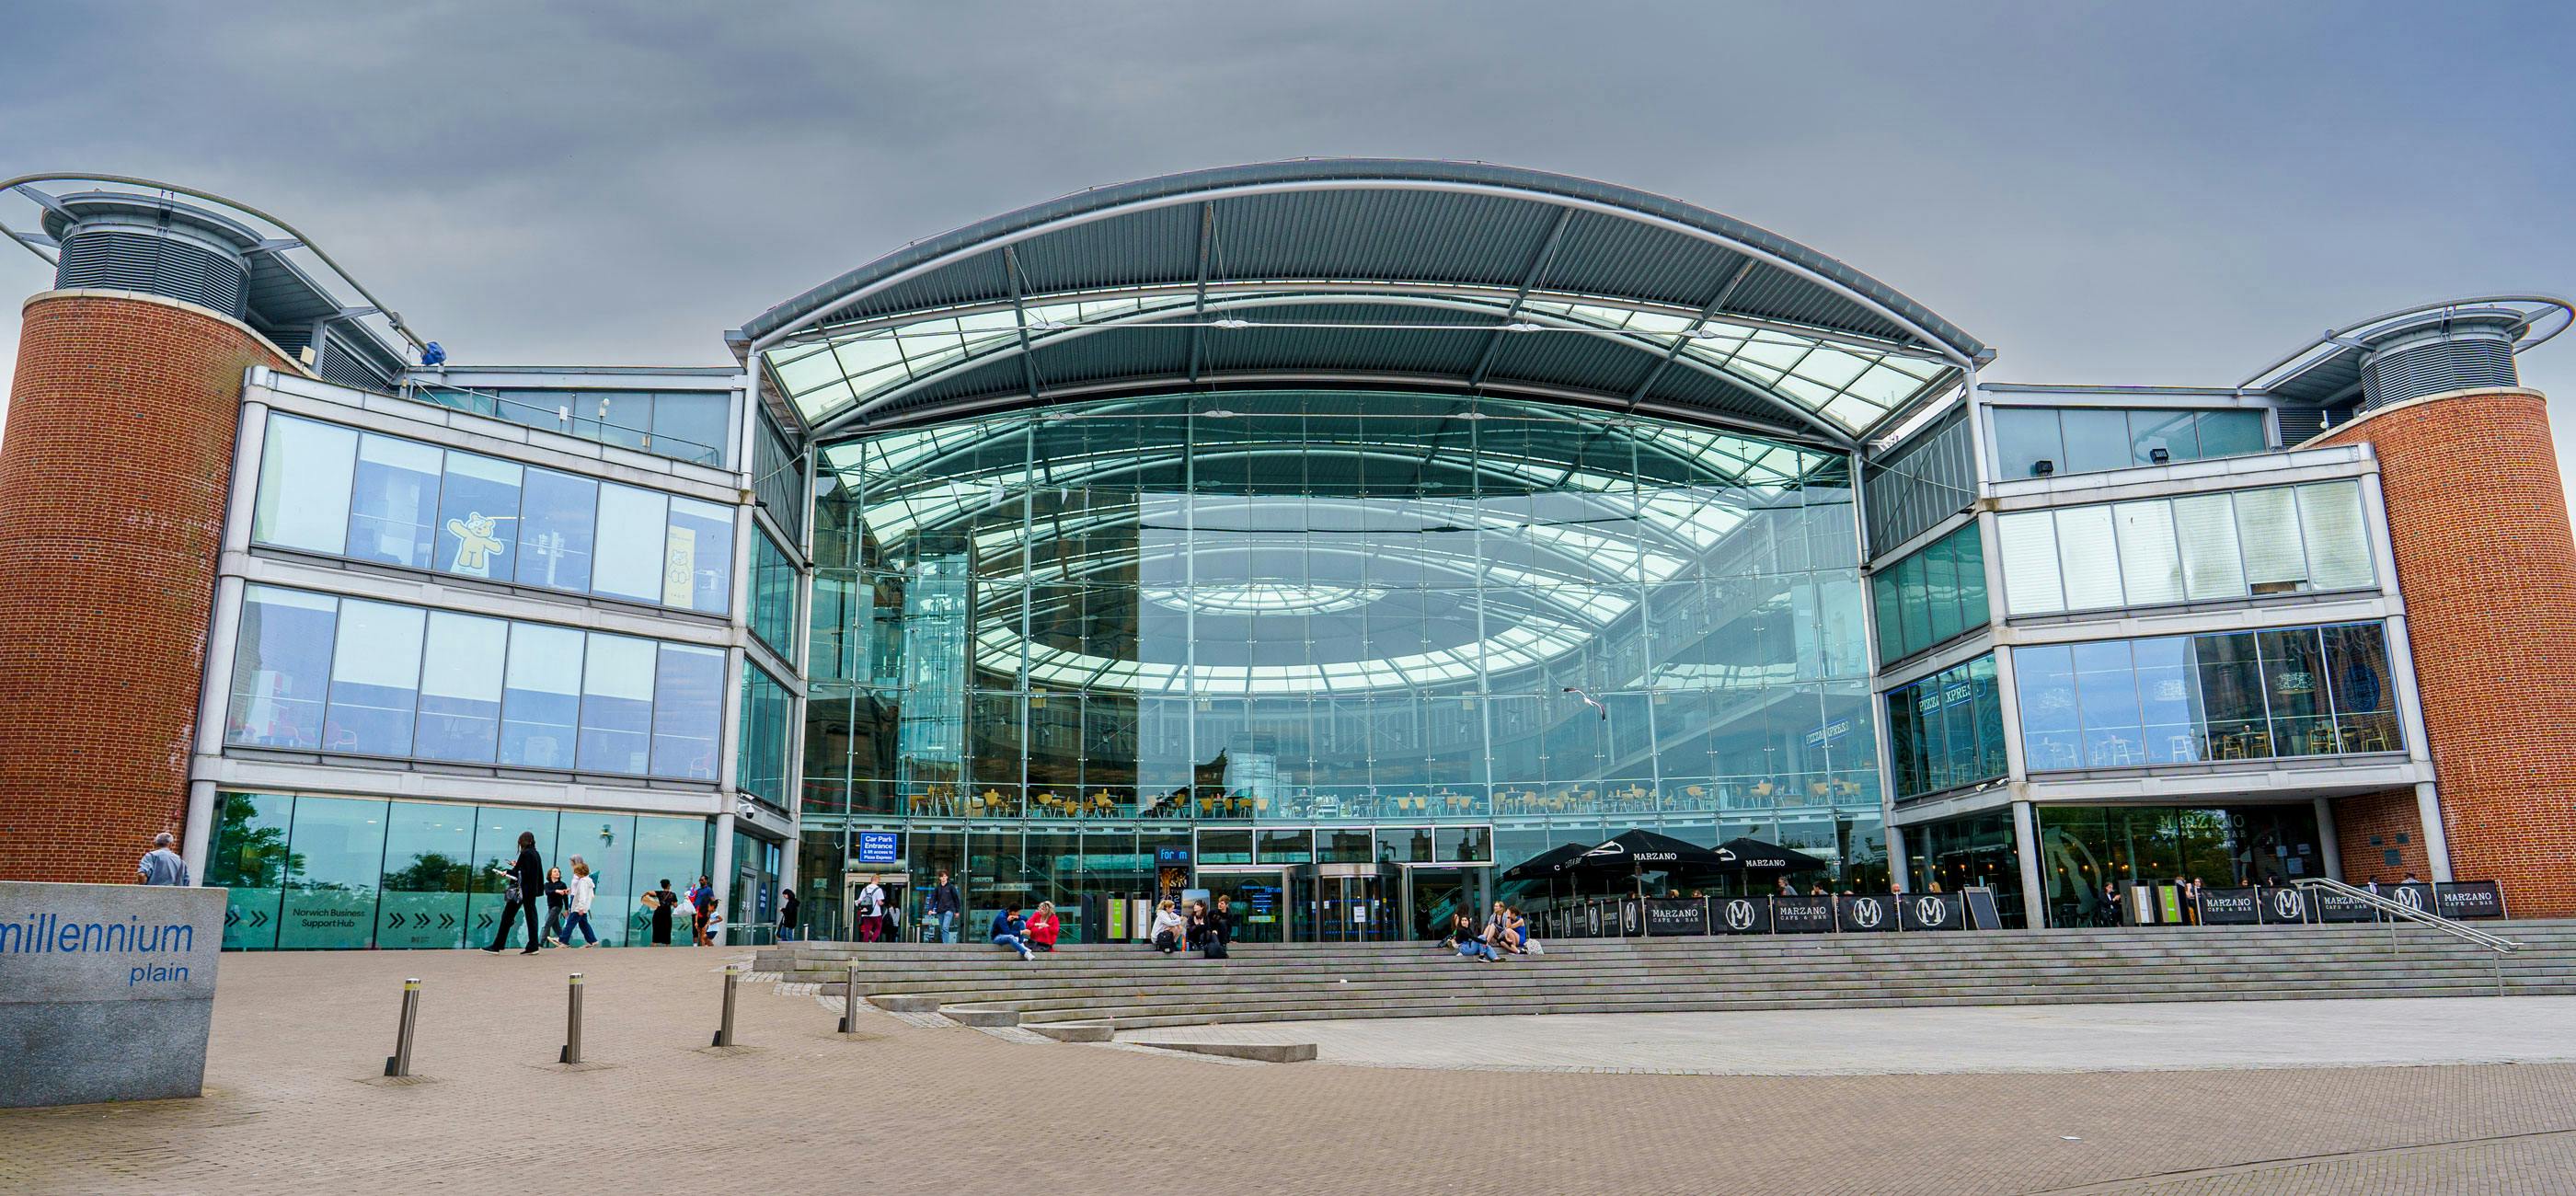 The Forum in Norwich, a large glass fronted building with a domed roof.